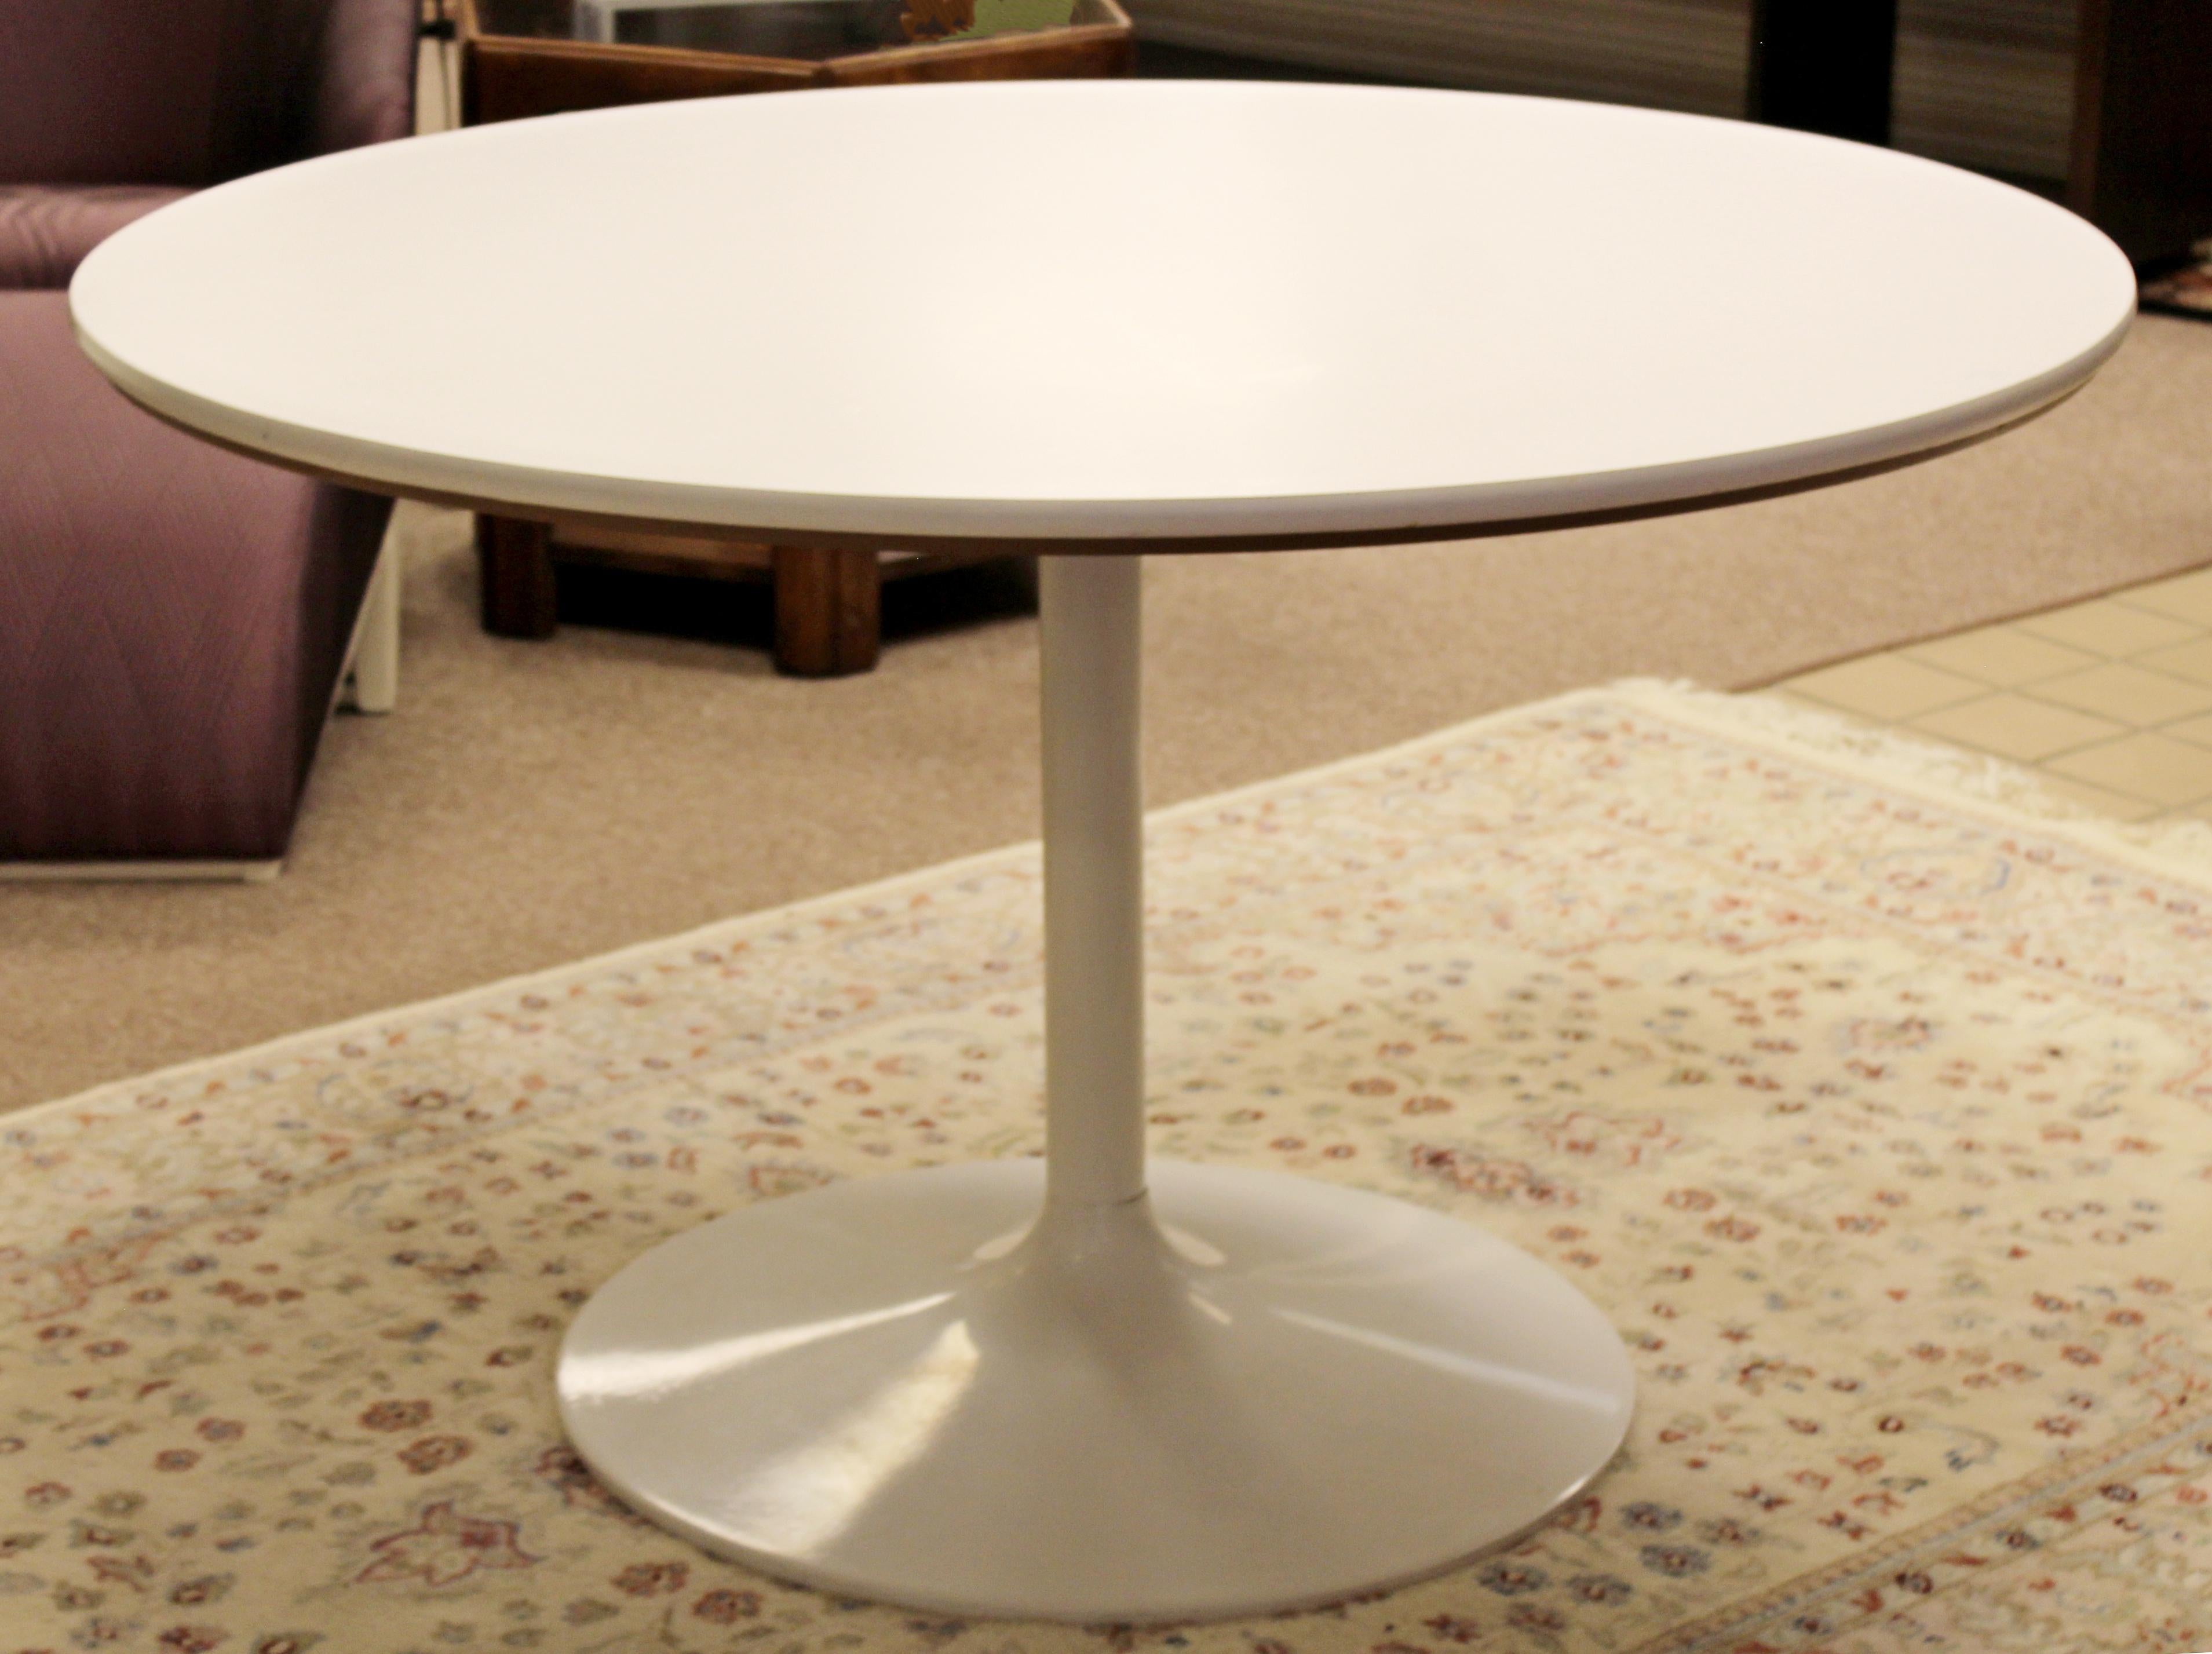 For your consideration is a wonderful, white game or dining table, in the Saarinen 